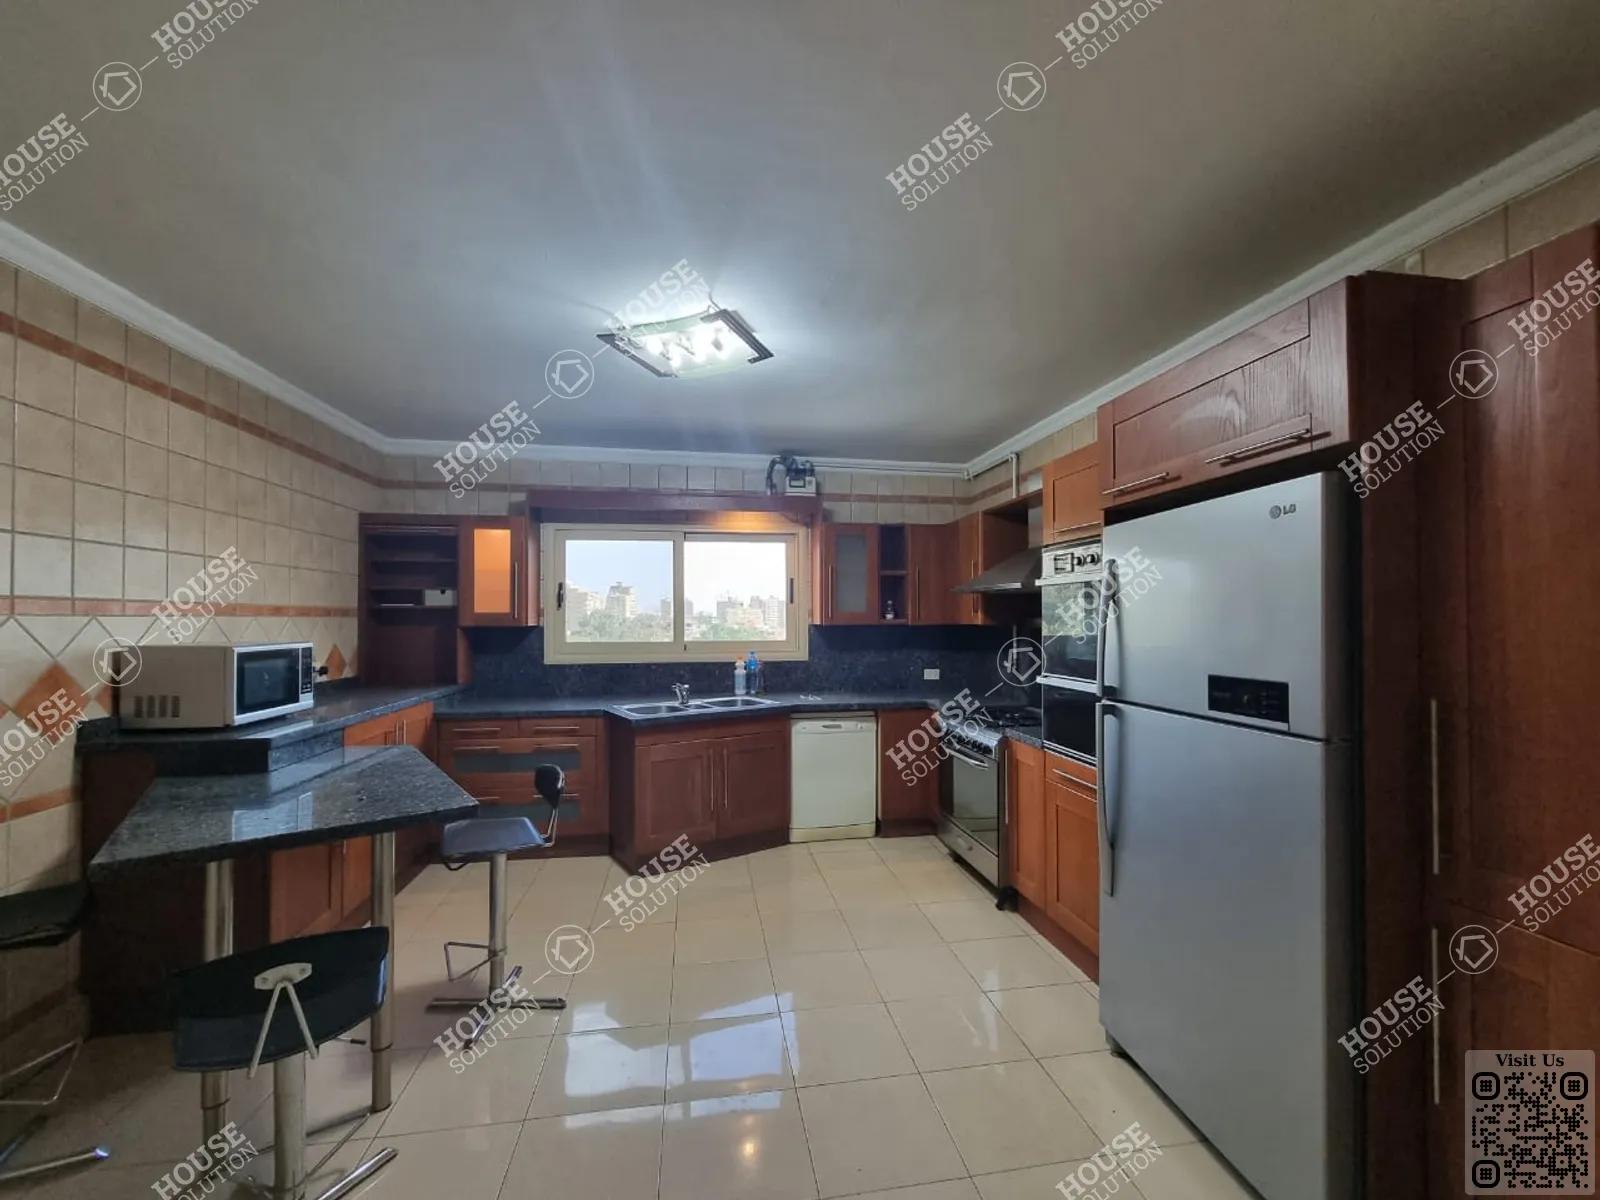 KITCHEN  @ Apartments For Rent In Maadi Maadi Sarayat Area: 325 m² consists of 4 Bedrooms 3 Bathrooms Furnished 5 stars #5263-2